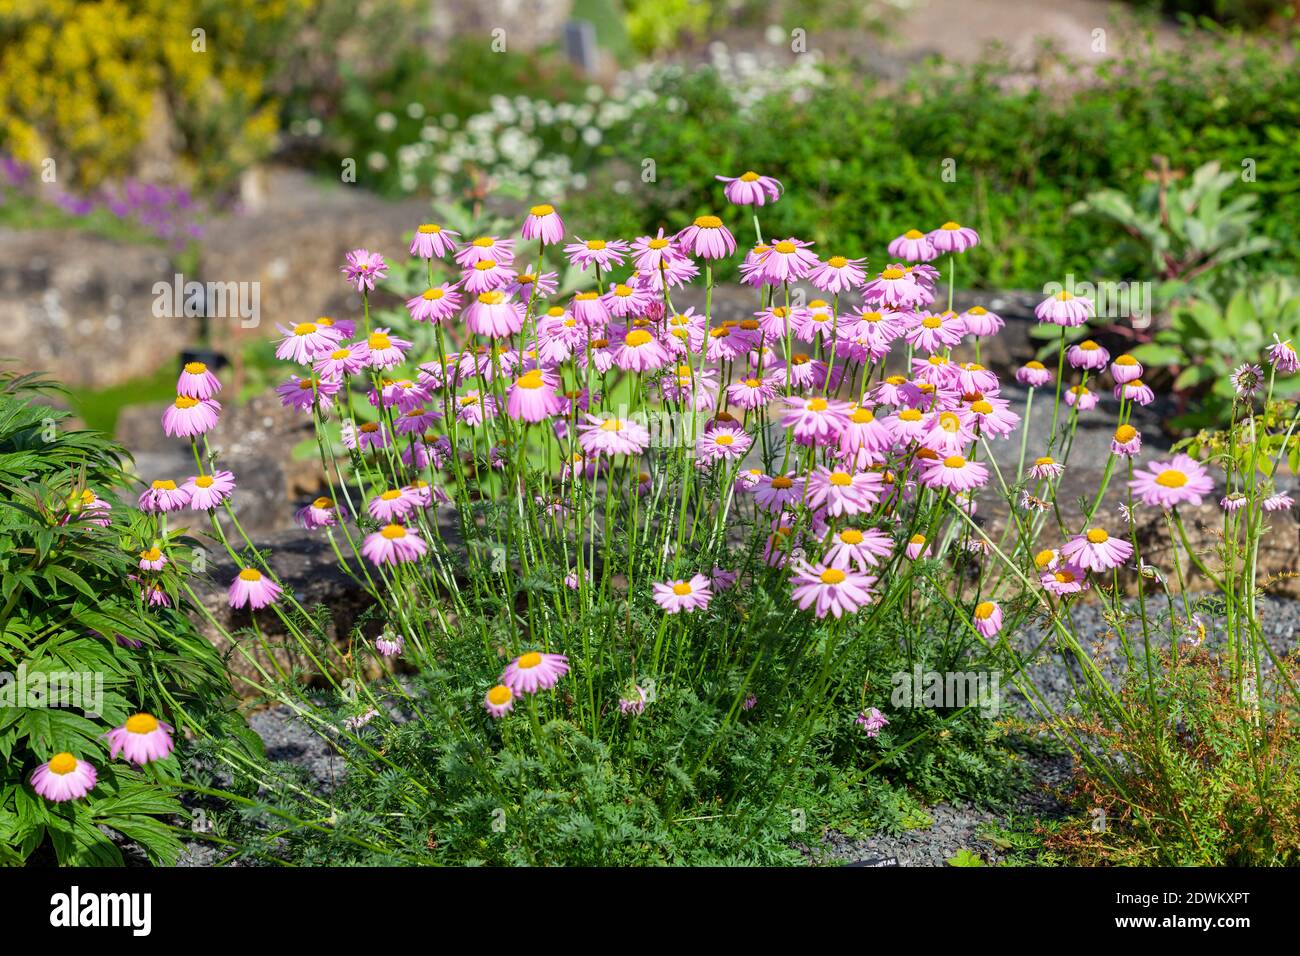 Tanacetum coccineum a spring summer flowering plant with a pink red summertime flower commonly known as Painted Daisy, stock photo image Stock Photo